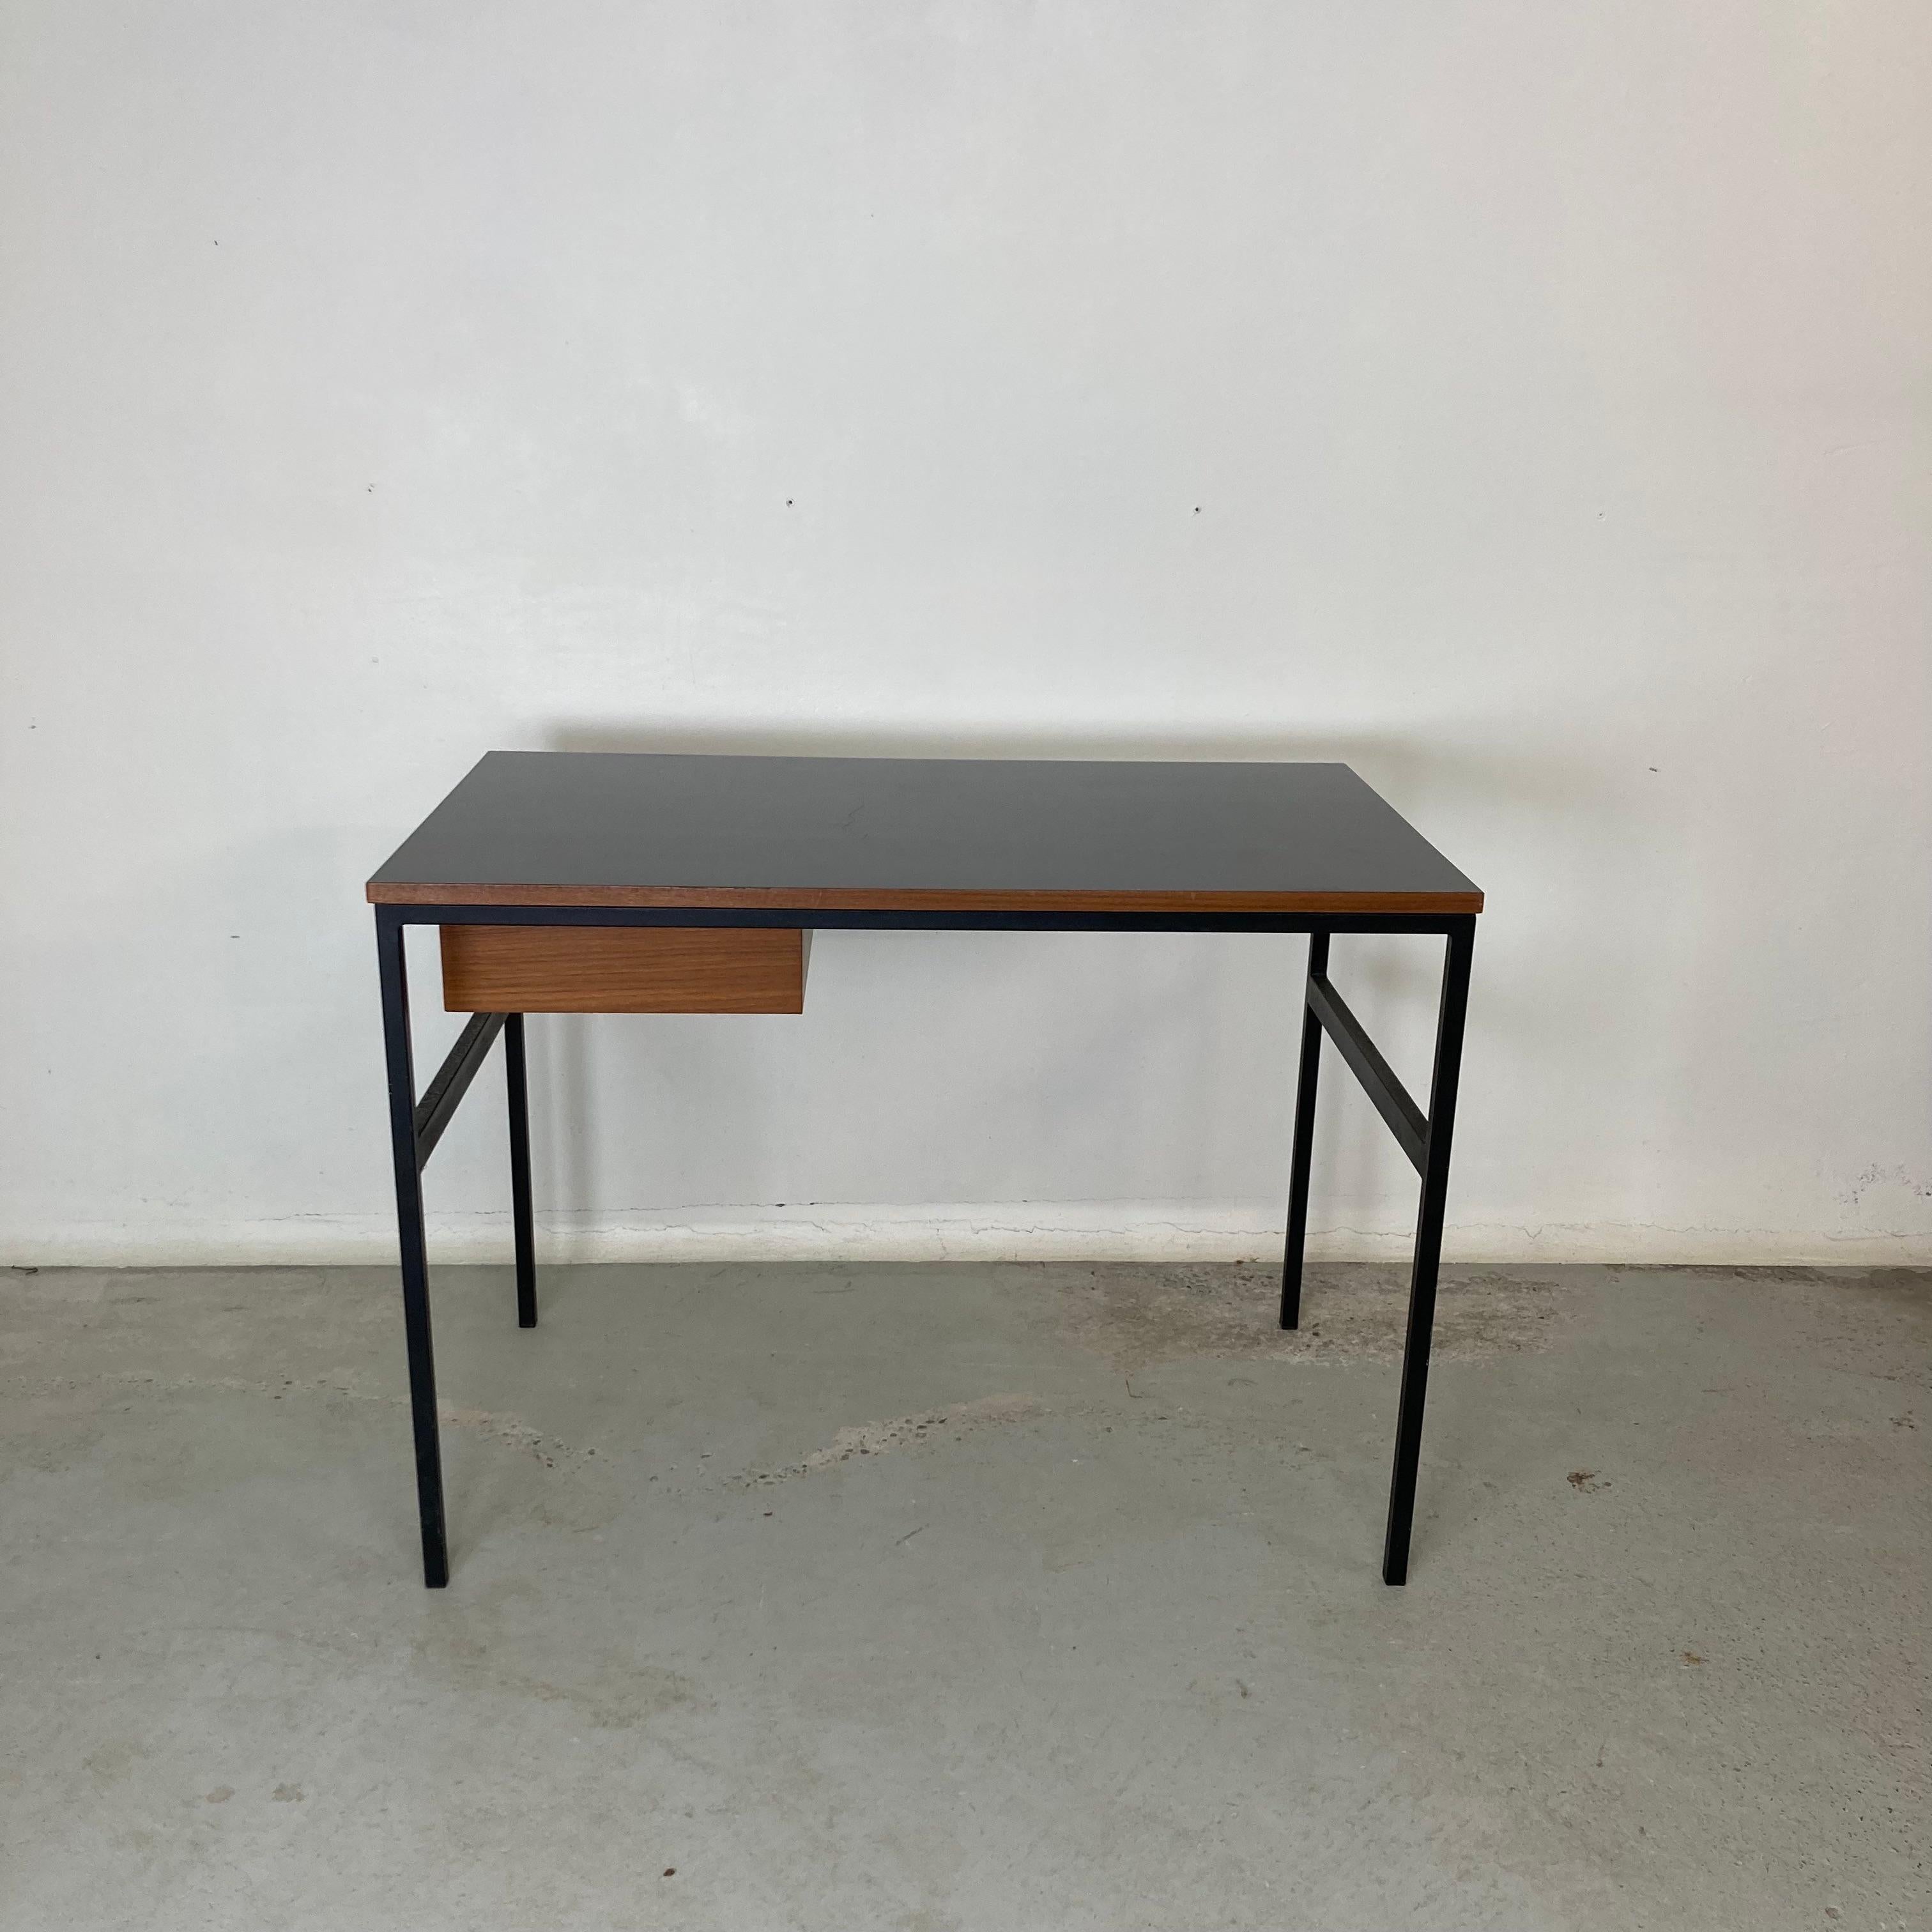 Pierre Paulin & Thonet Desk with Drawer, Metal Teak & Formica, France Circa 1955 For Sale 1